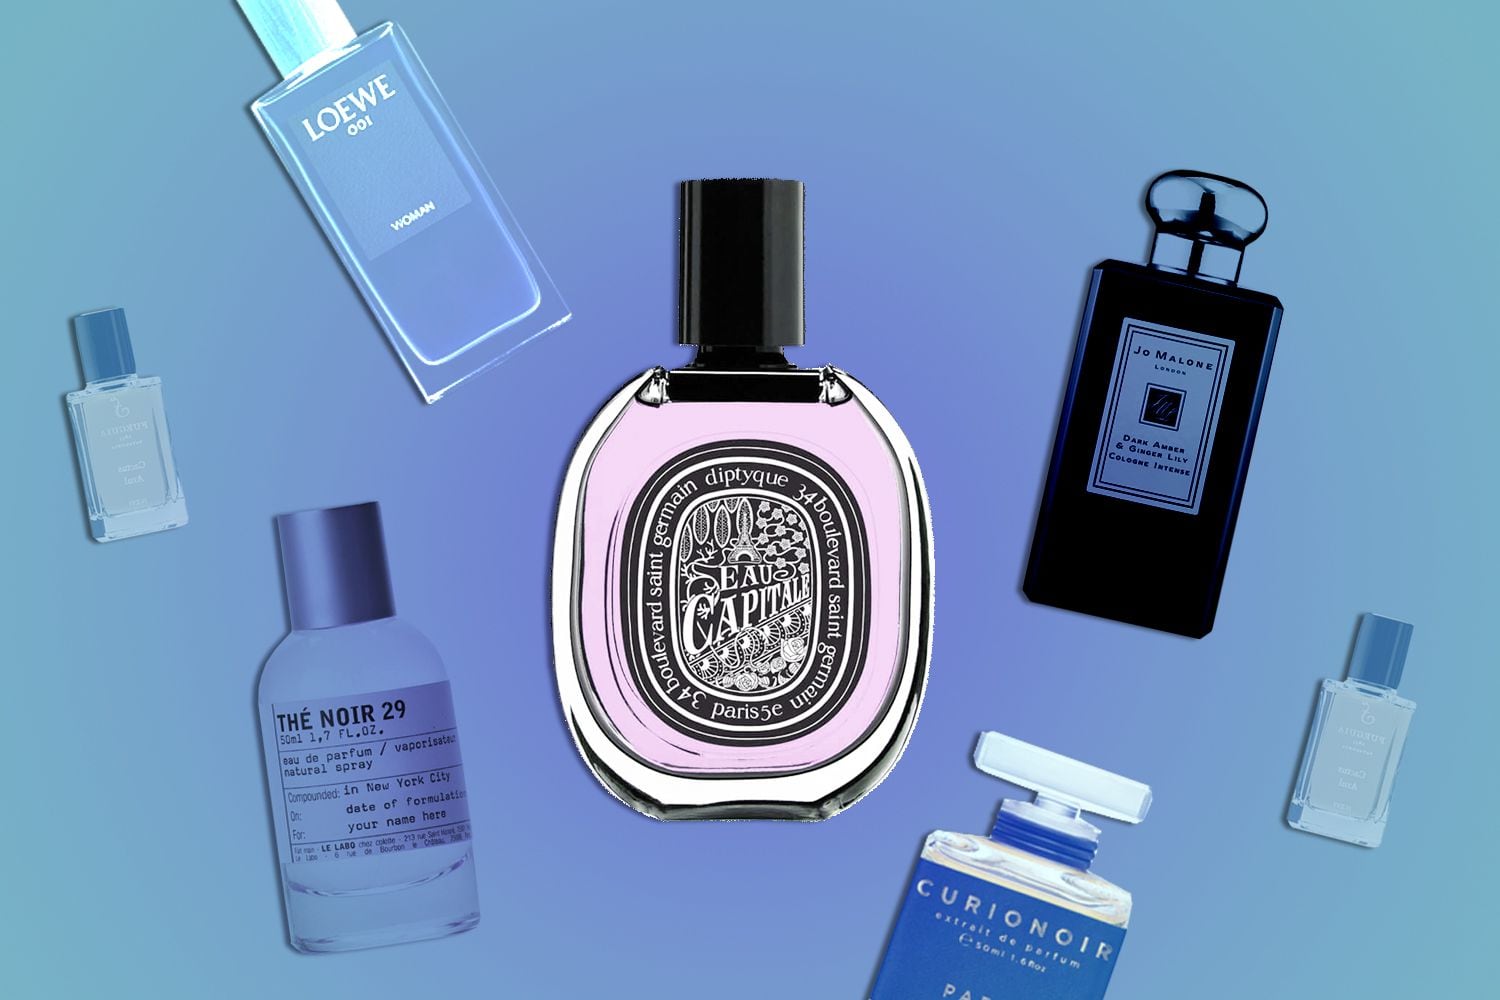 What Perfume Are You Wearing? 16 People Who Smell Good Share Their  Signature Scent - NZ Herald